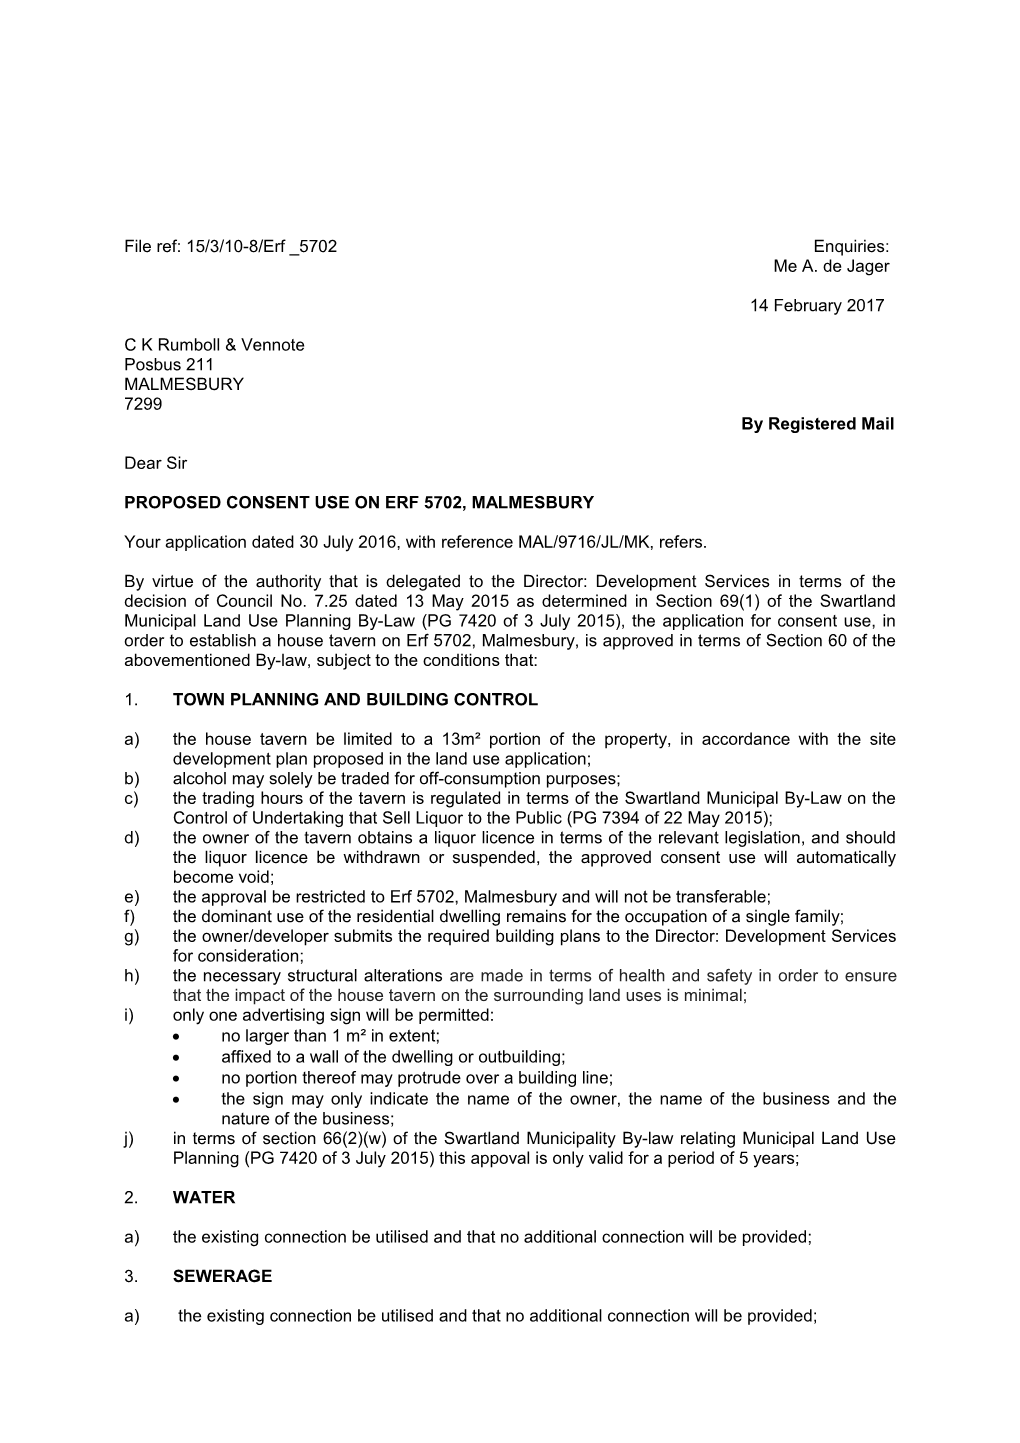 Proposed Consent Use Onerf 5702,Malmesbury